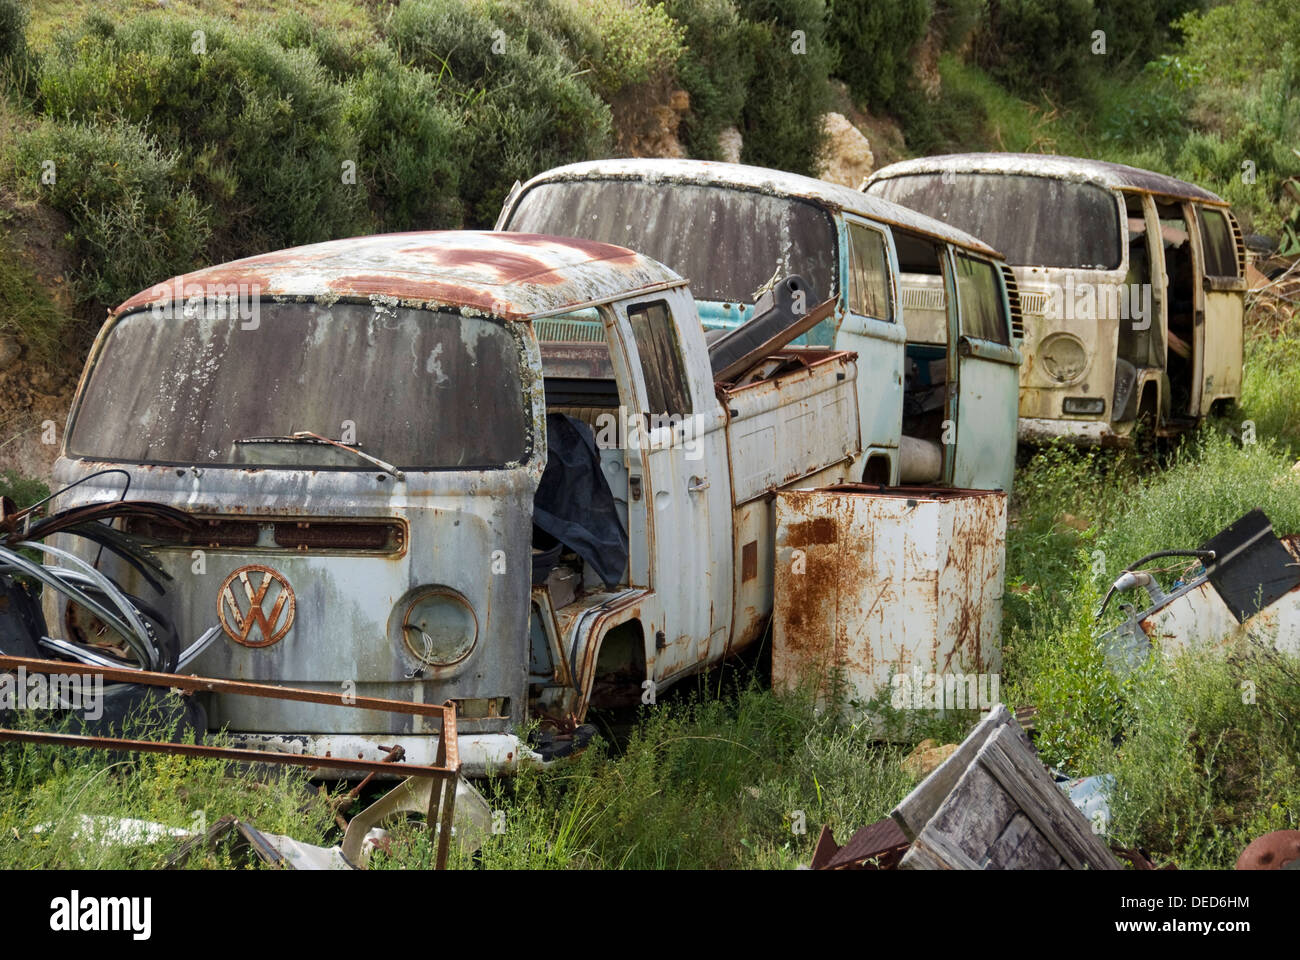 Camper Vans Old High Resolution Stock Photography and Images - Alamy